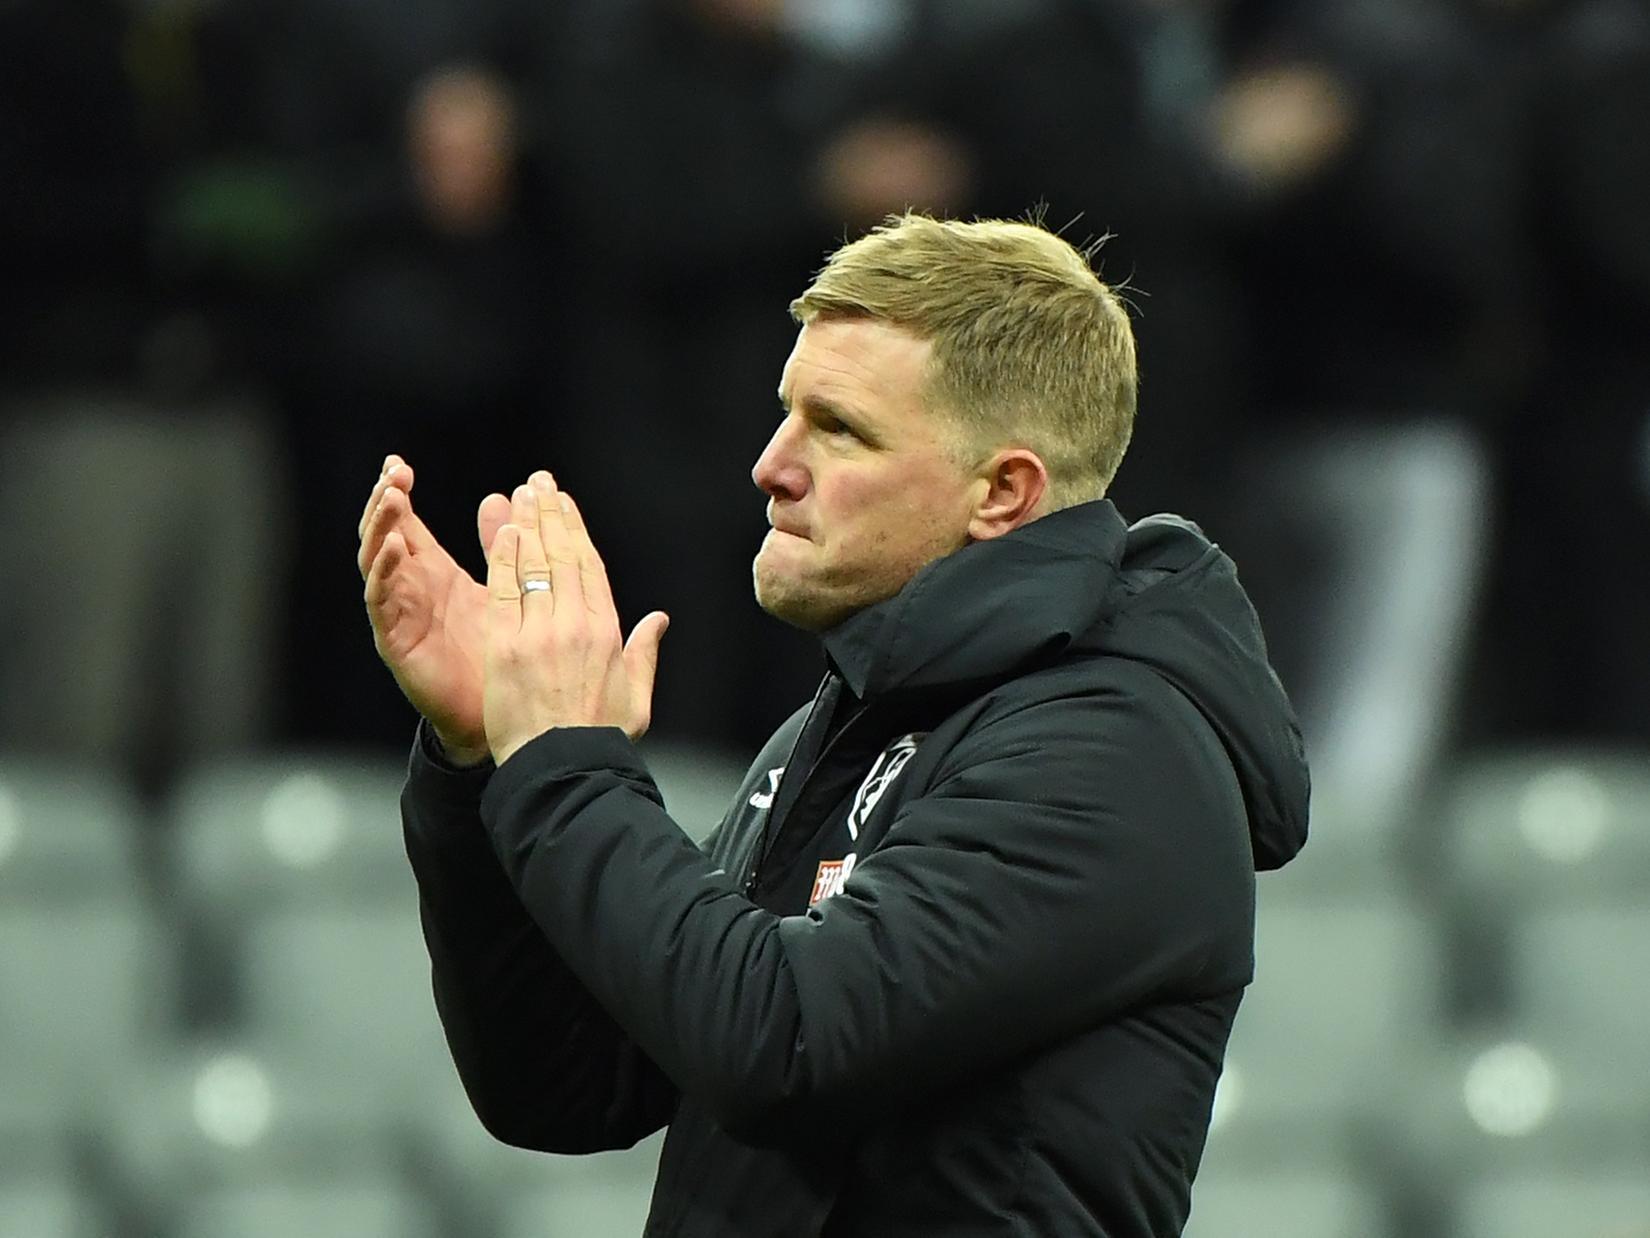 Eddie Howe was once again overlooked for a top job this week, as Mourinho went to Spurs. Still, Wolves certainly won't be underestimatingthe side, and Ryan Bennett has urged his team to wary of their threat this weekend.